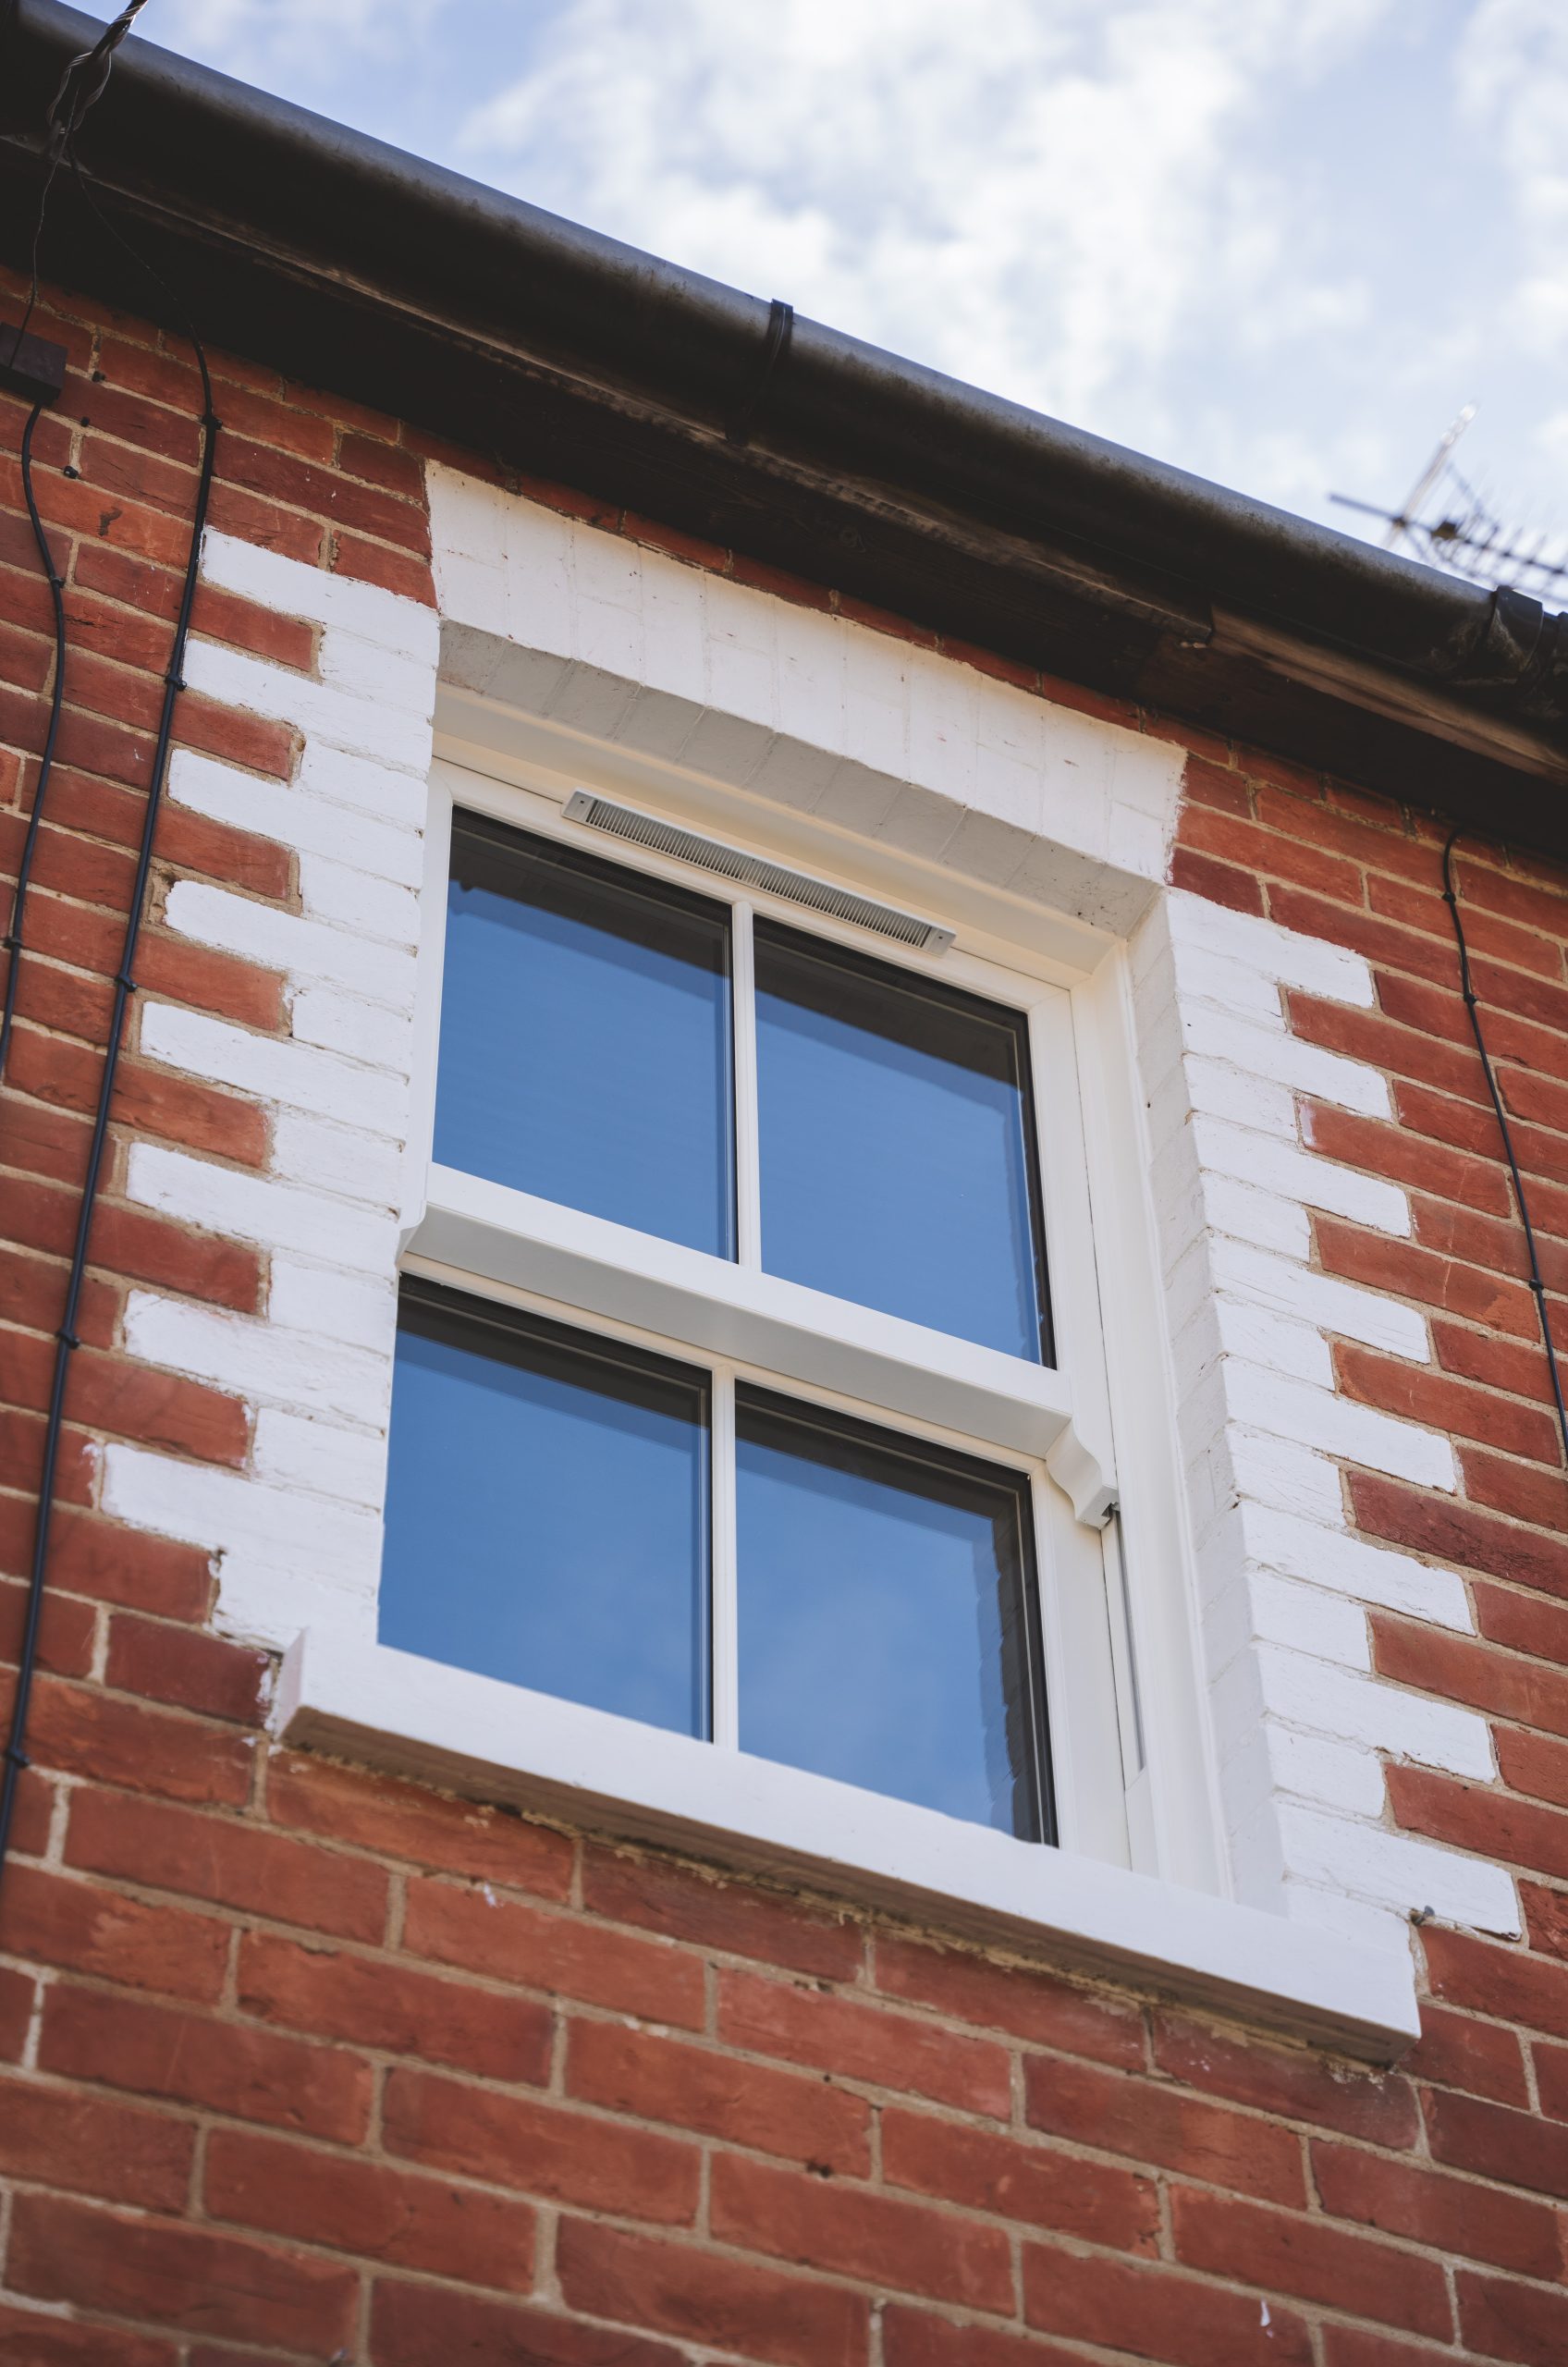 An All You Need To Know Guide on Sash Window Parts